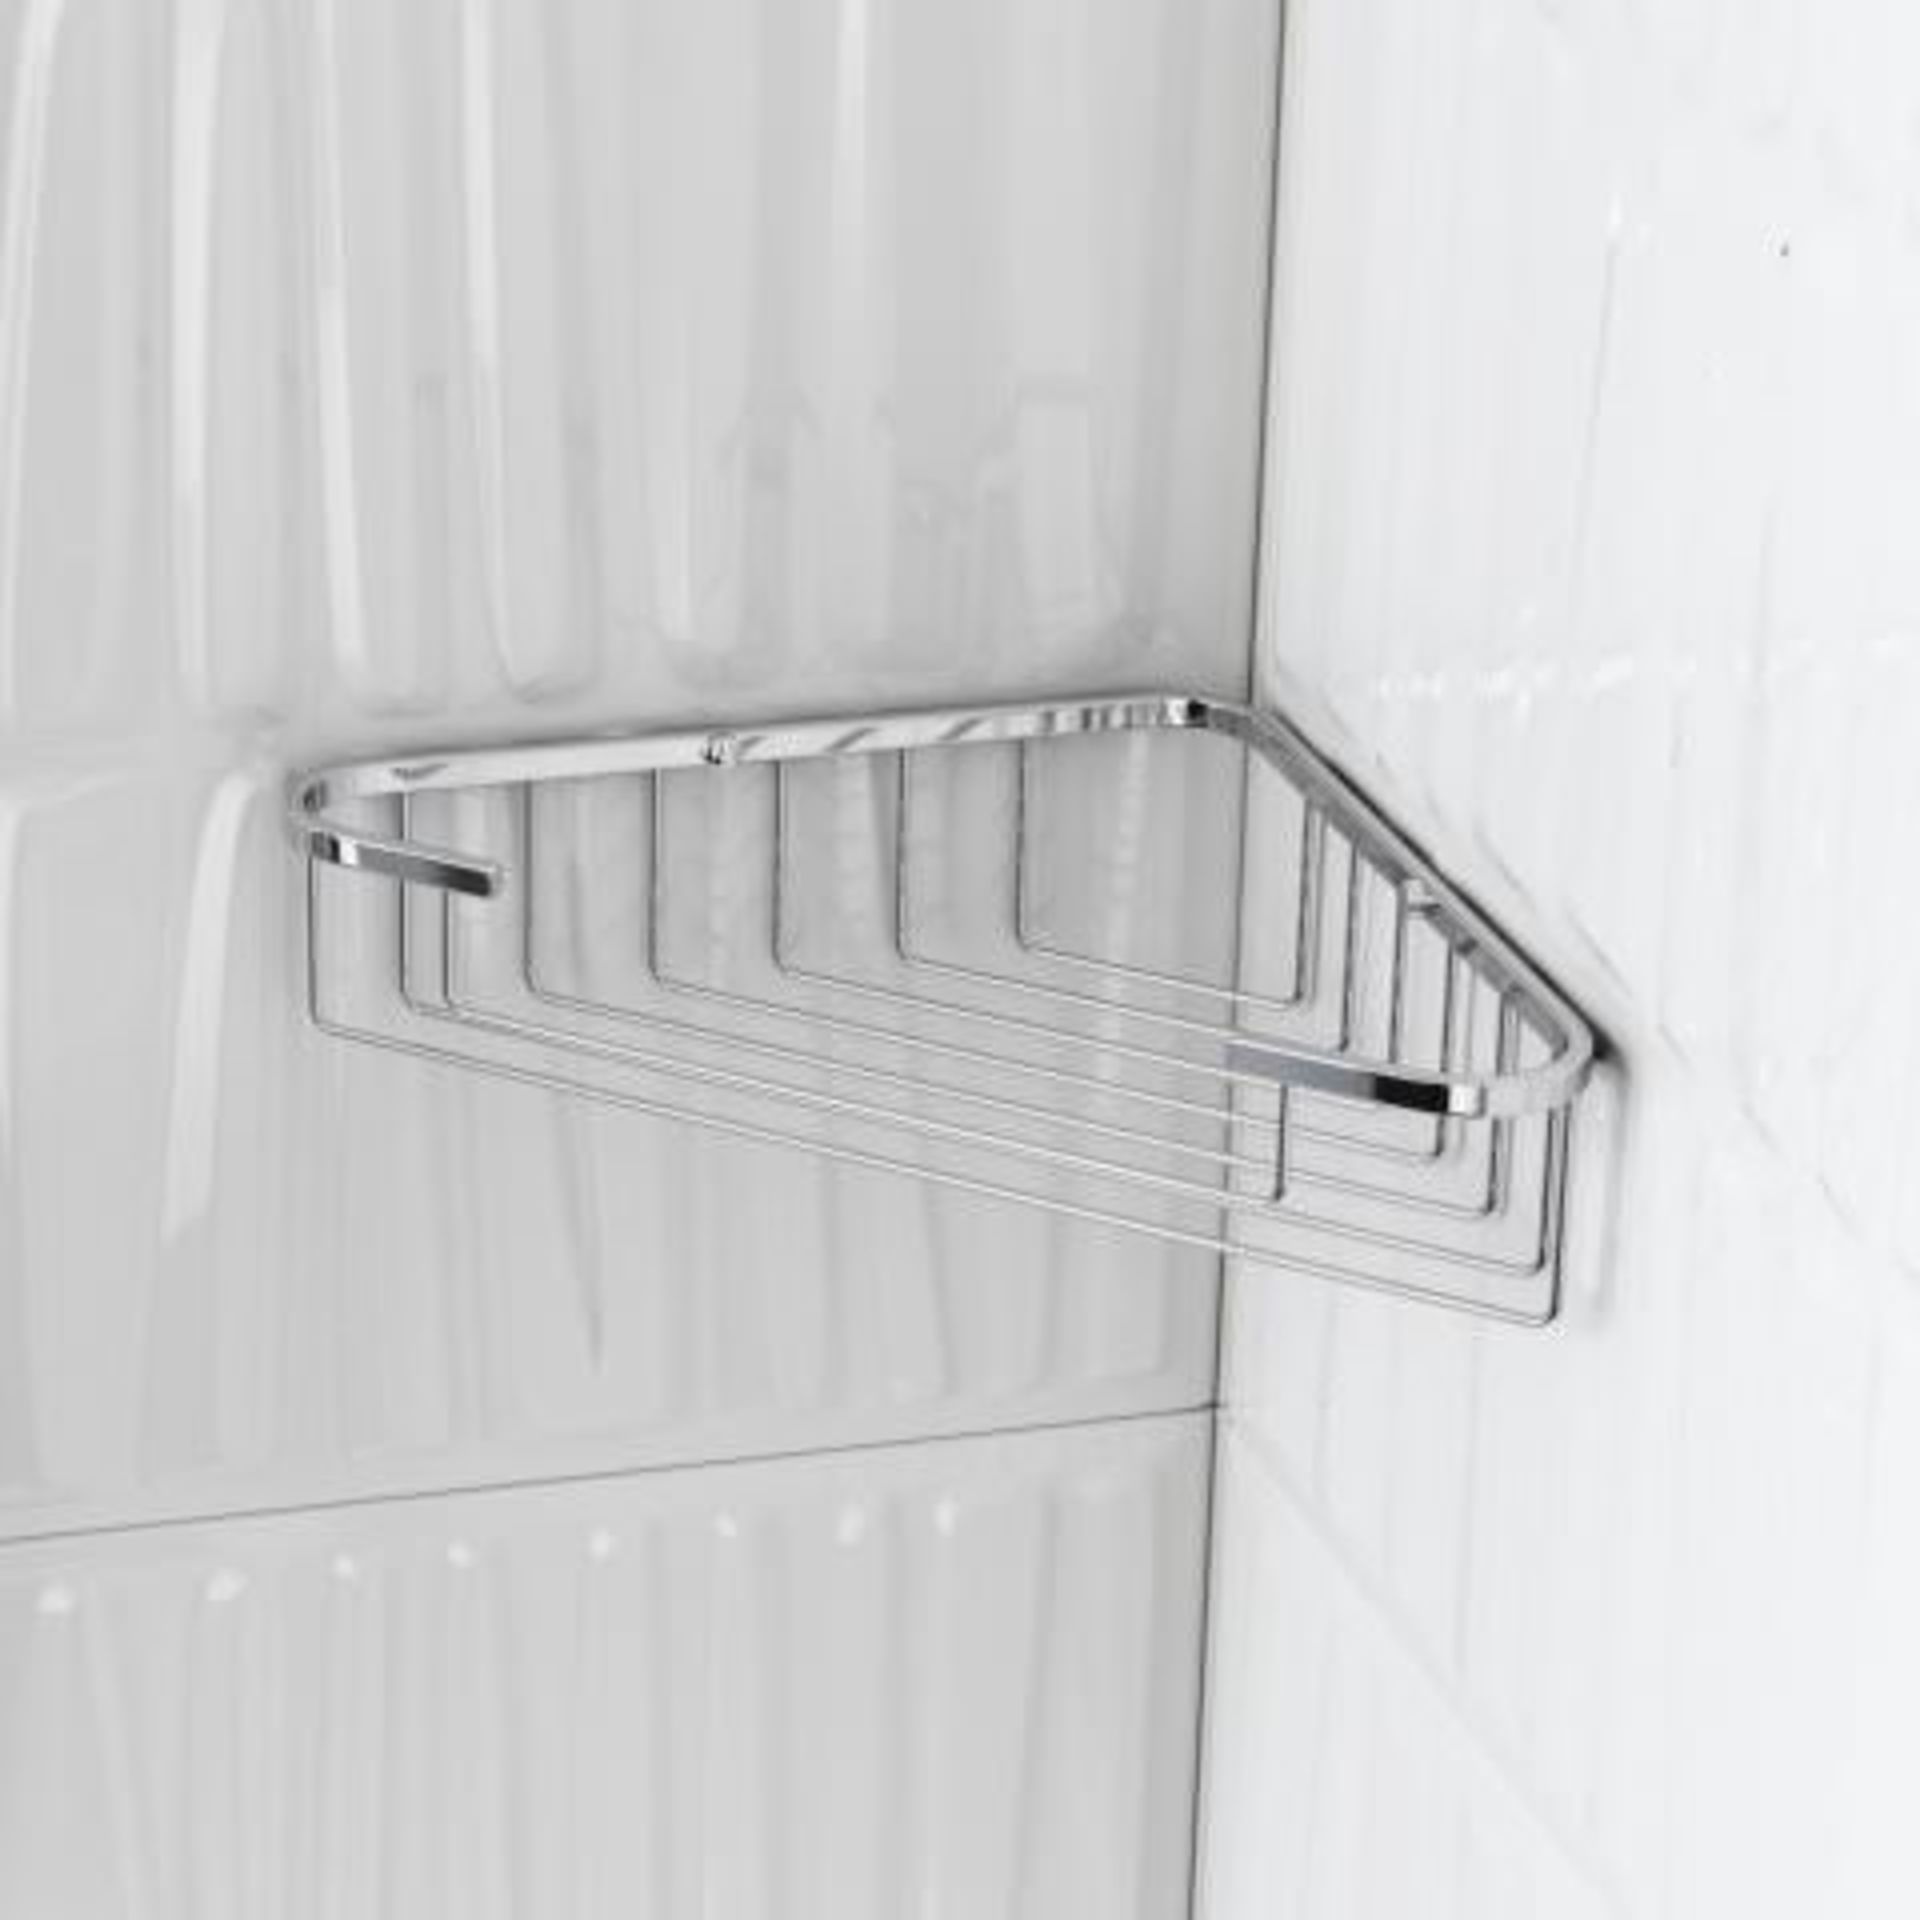 (AA39) Corner Shower Basket Make the most of space in your shower with our range of corner shower